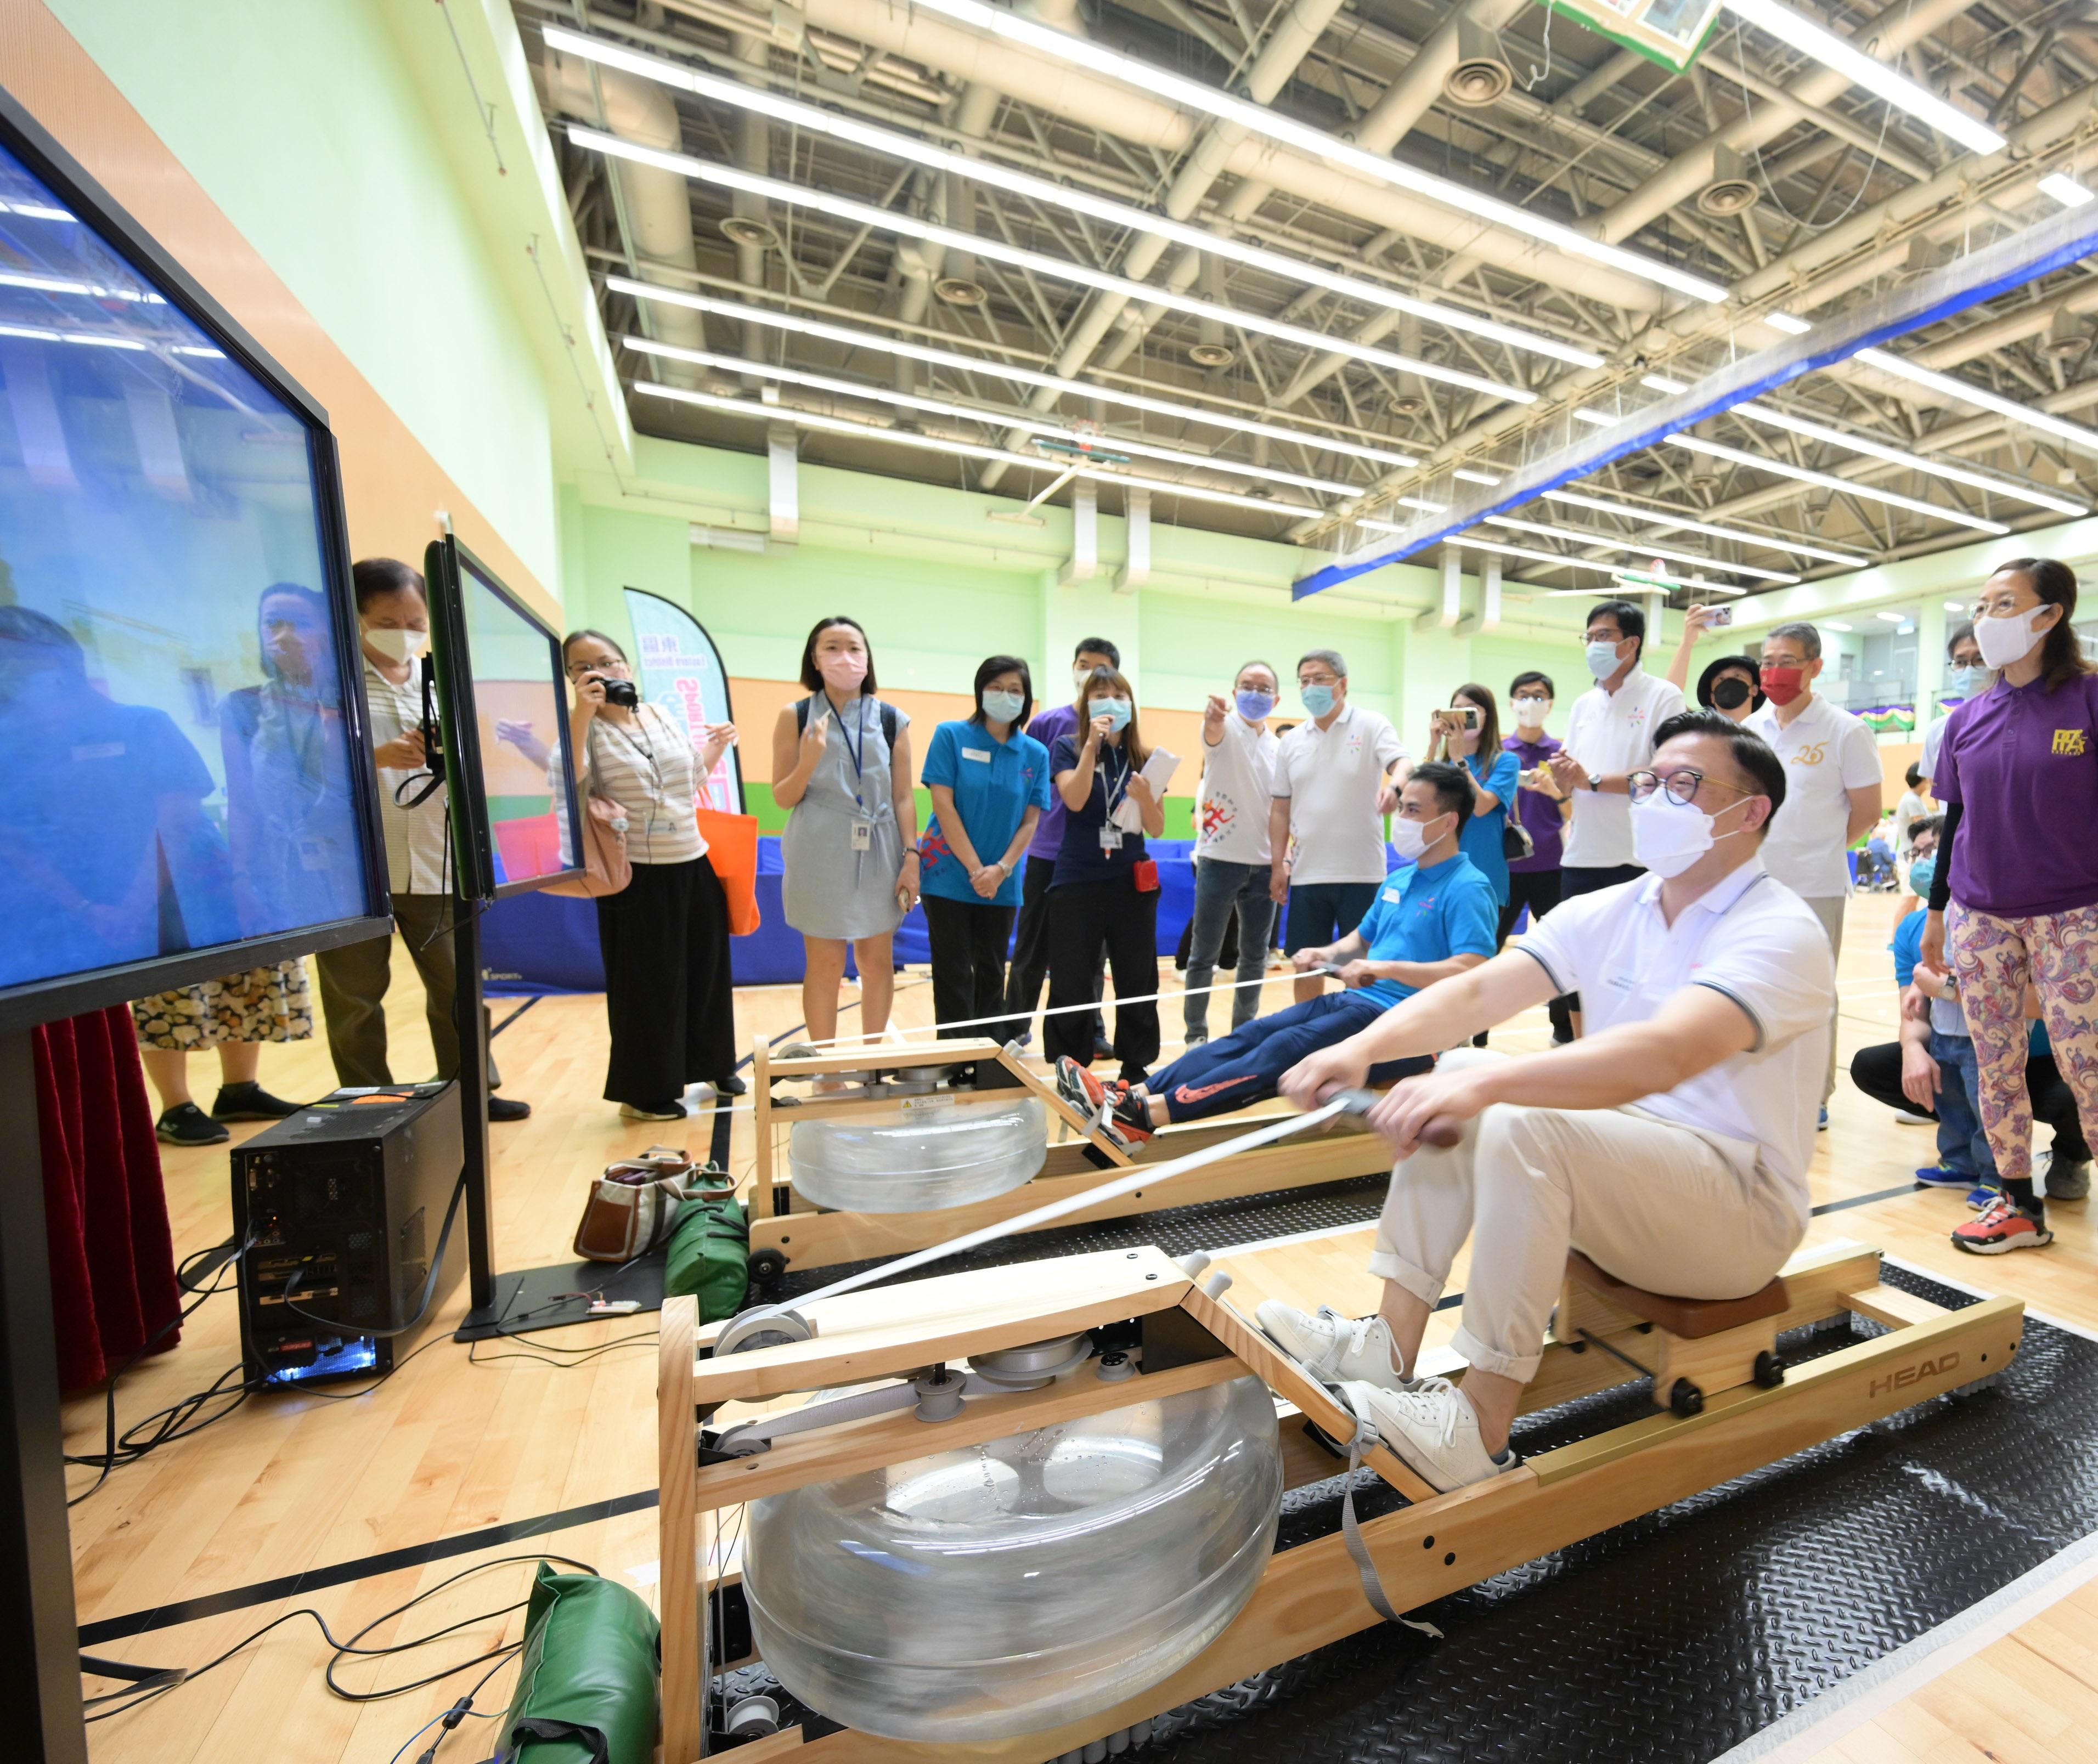 The Deputy Secretary for Justice, Mr Cheung Kwok-kwan, (second right), participated in Sport For All Day 2022 activities at Island East Sports Centre this afternoon (August 7). Photo shows Mr Cheung taking part in a rowing game.
